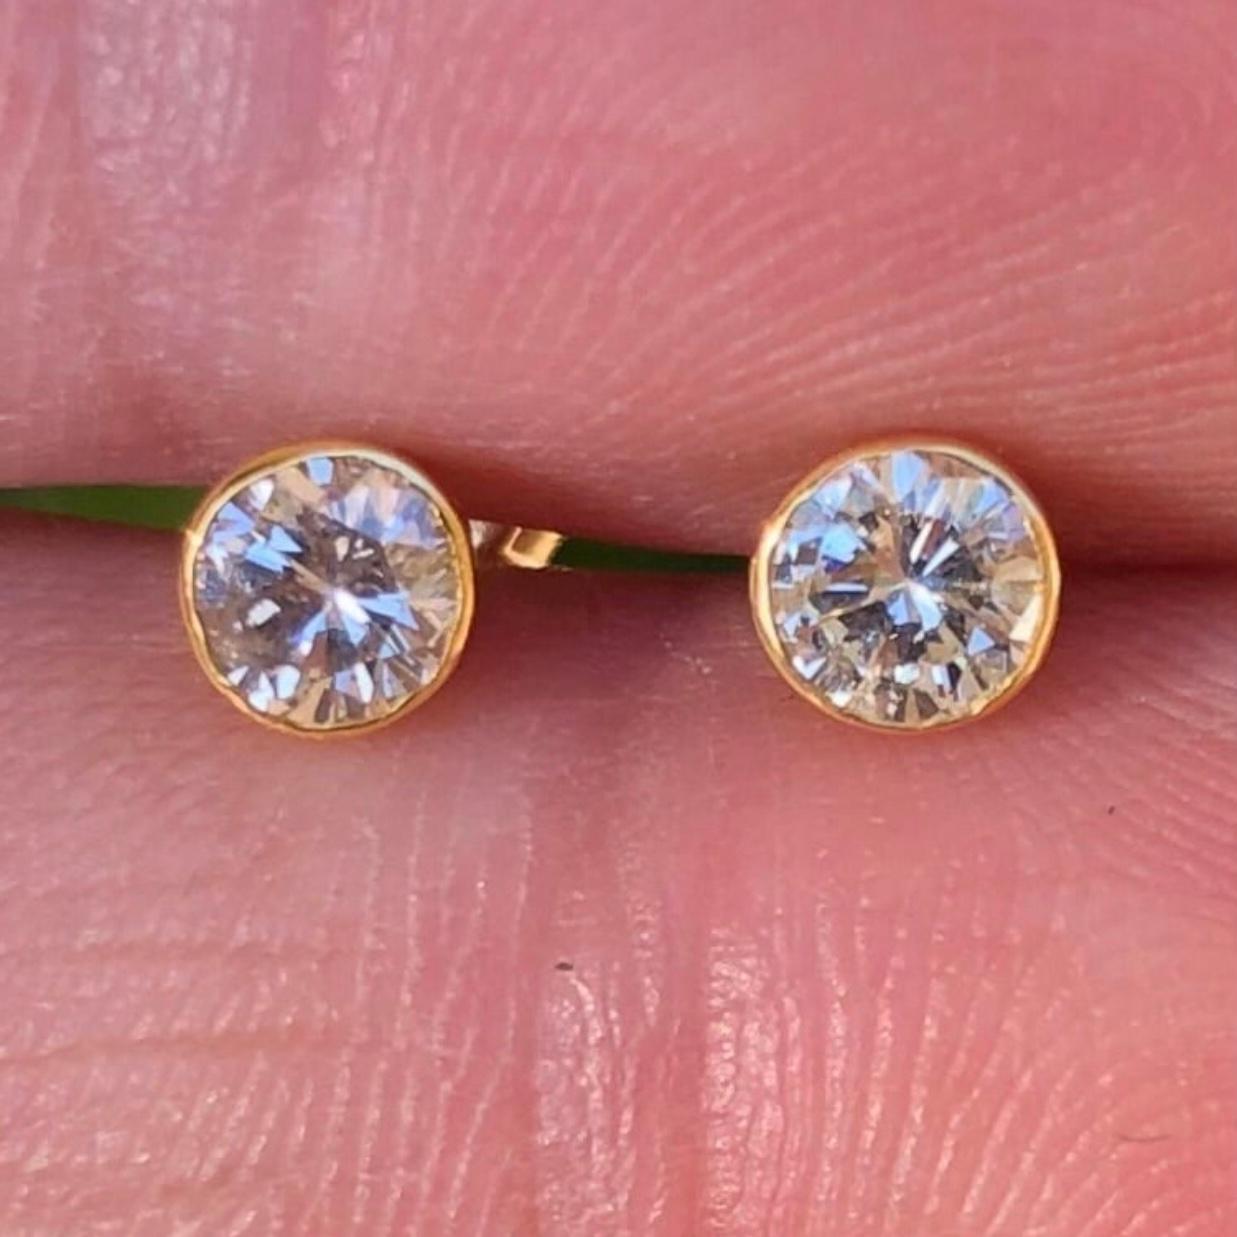 Near 1 Carat Ct 2 Natural Real Solitaire Diamond Stud Earrings 14k Yellow Gold In New Condition For Sale In New York, NY